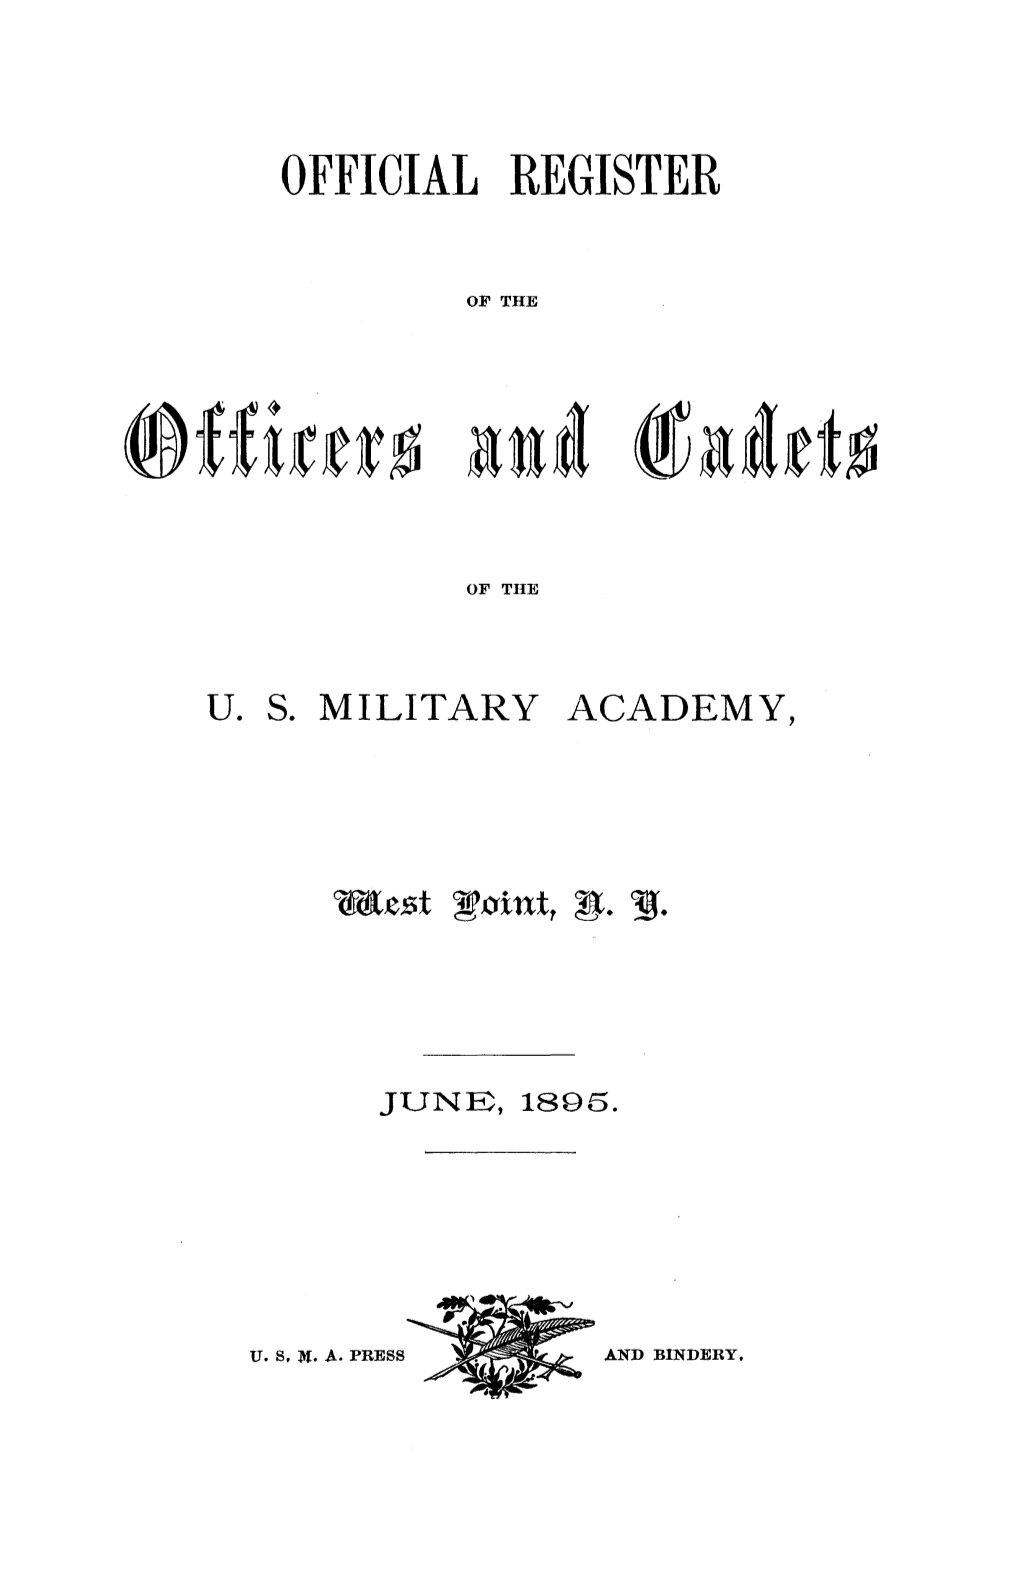 Official Register of the Officers and Cadets of the U.S. Military Academy, West Point, N.Y. 1895